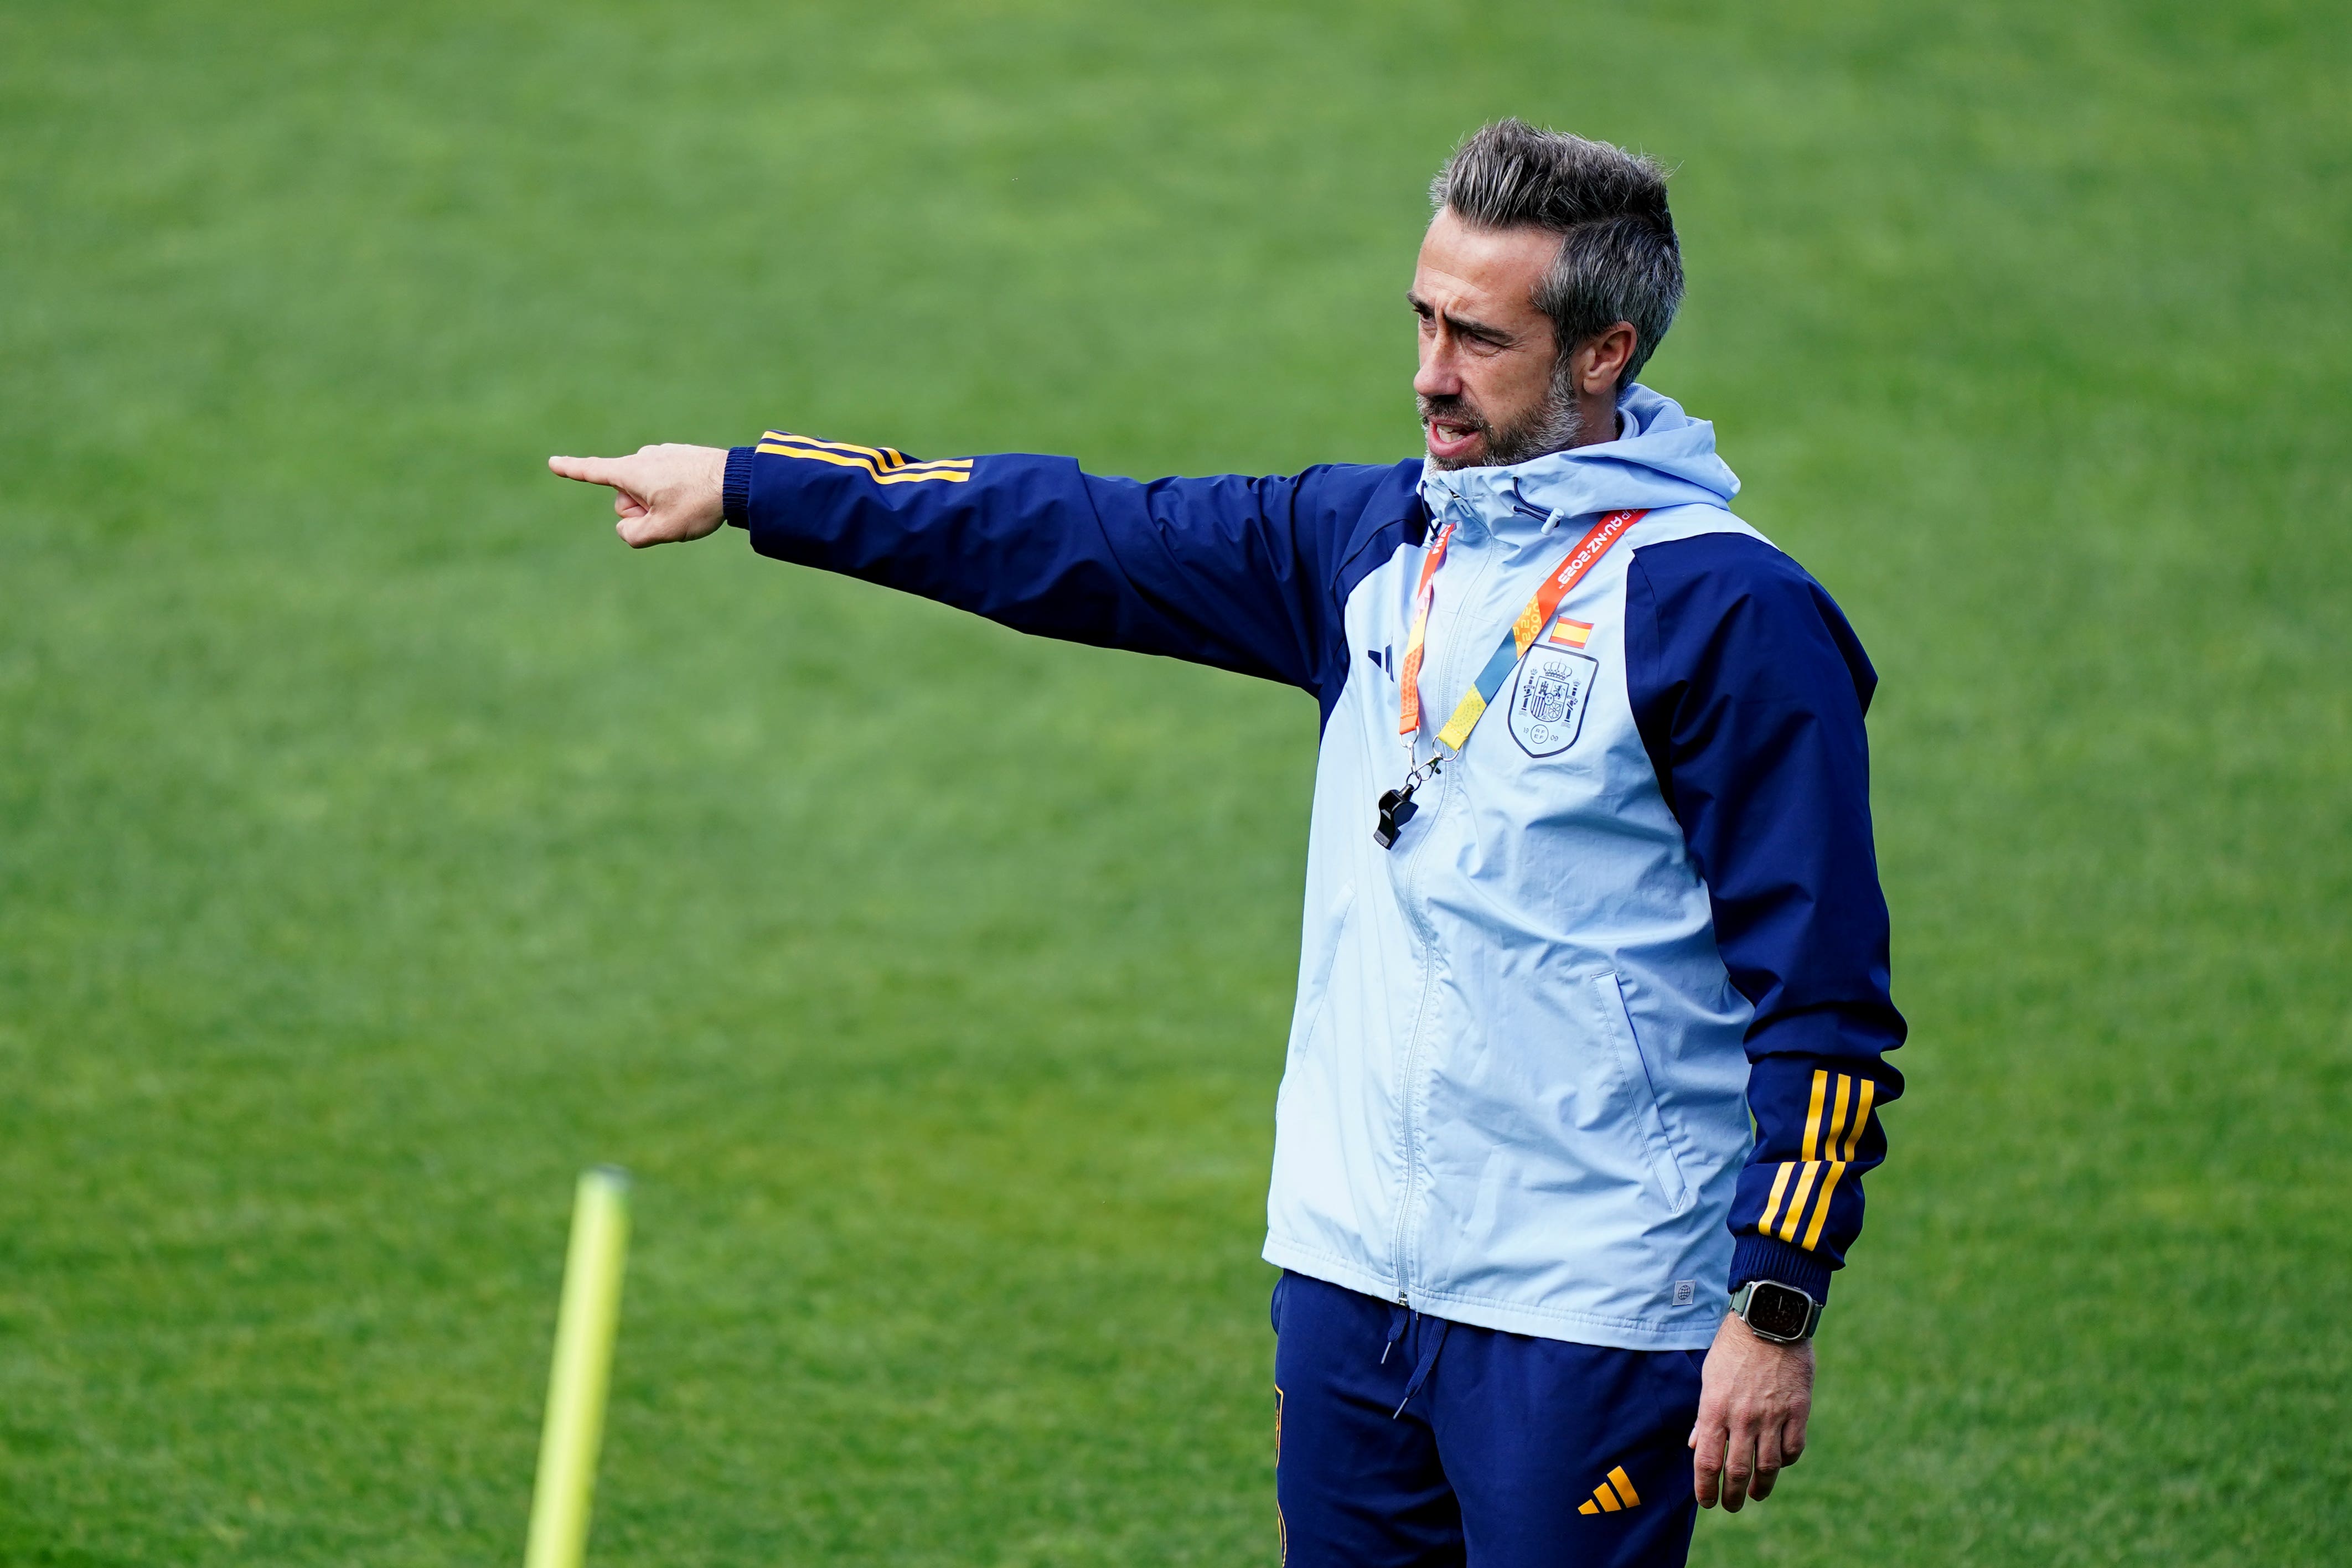 Jorge Vilda has led Spain to the World Cup final less than a year after 15 players staged a mutiny over their treatment (Zac Goodwin/PA).